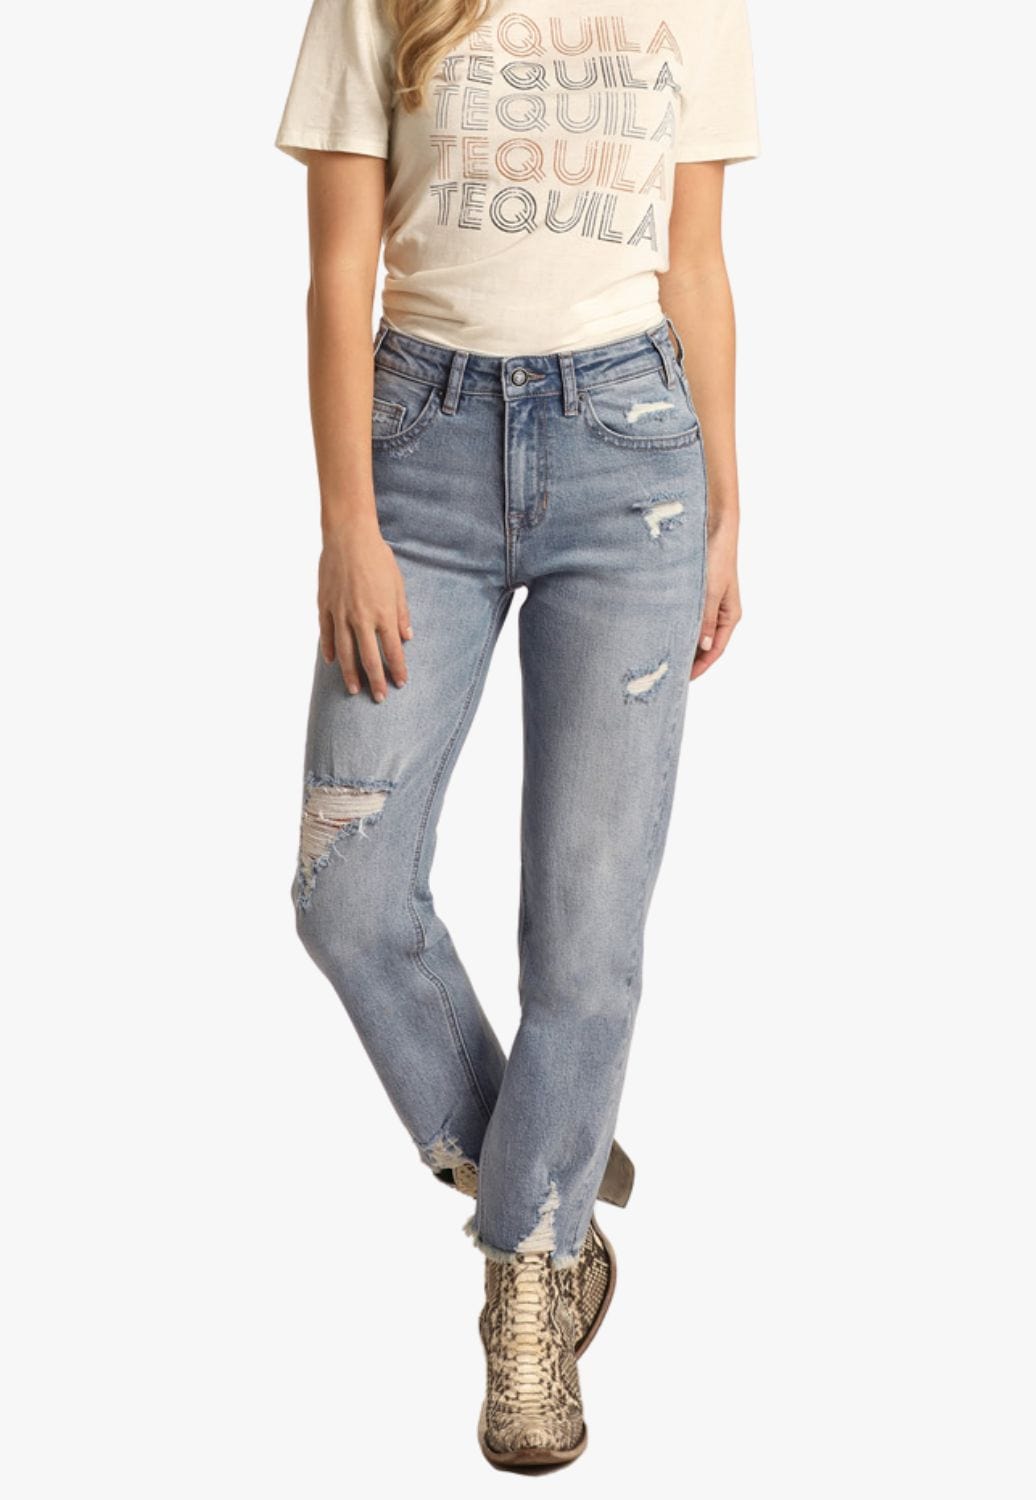 Rock and Roll CLOTHING-Womens Jeans Rock and Roll Womens Cropped Jean